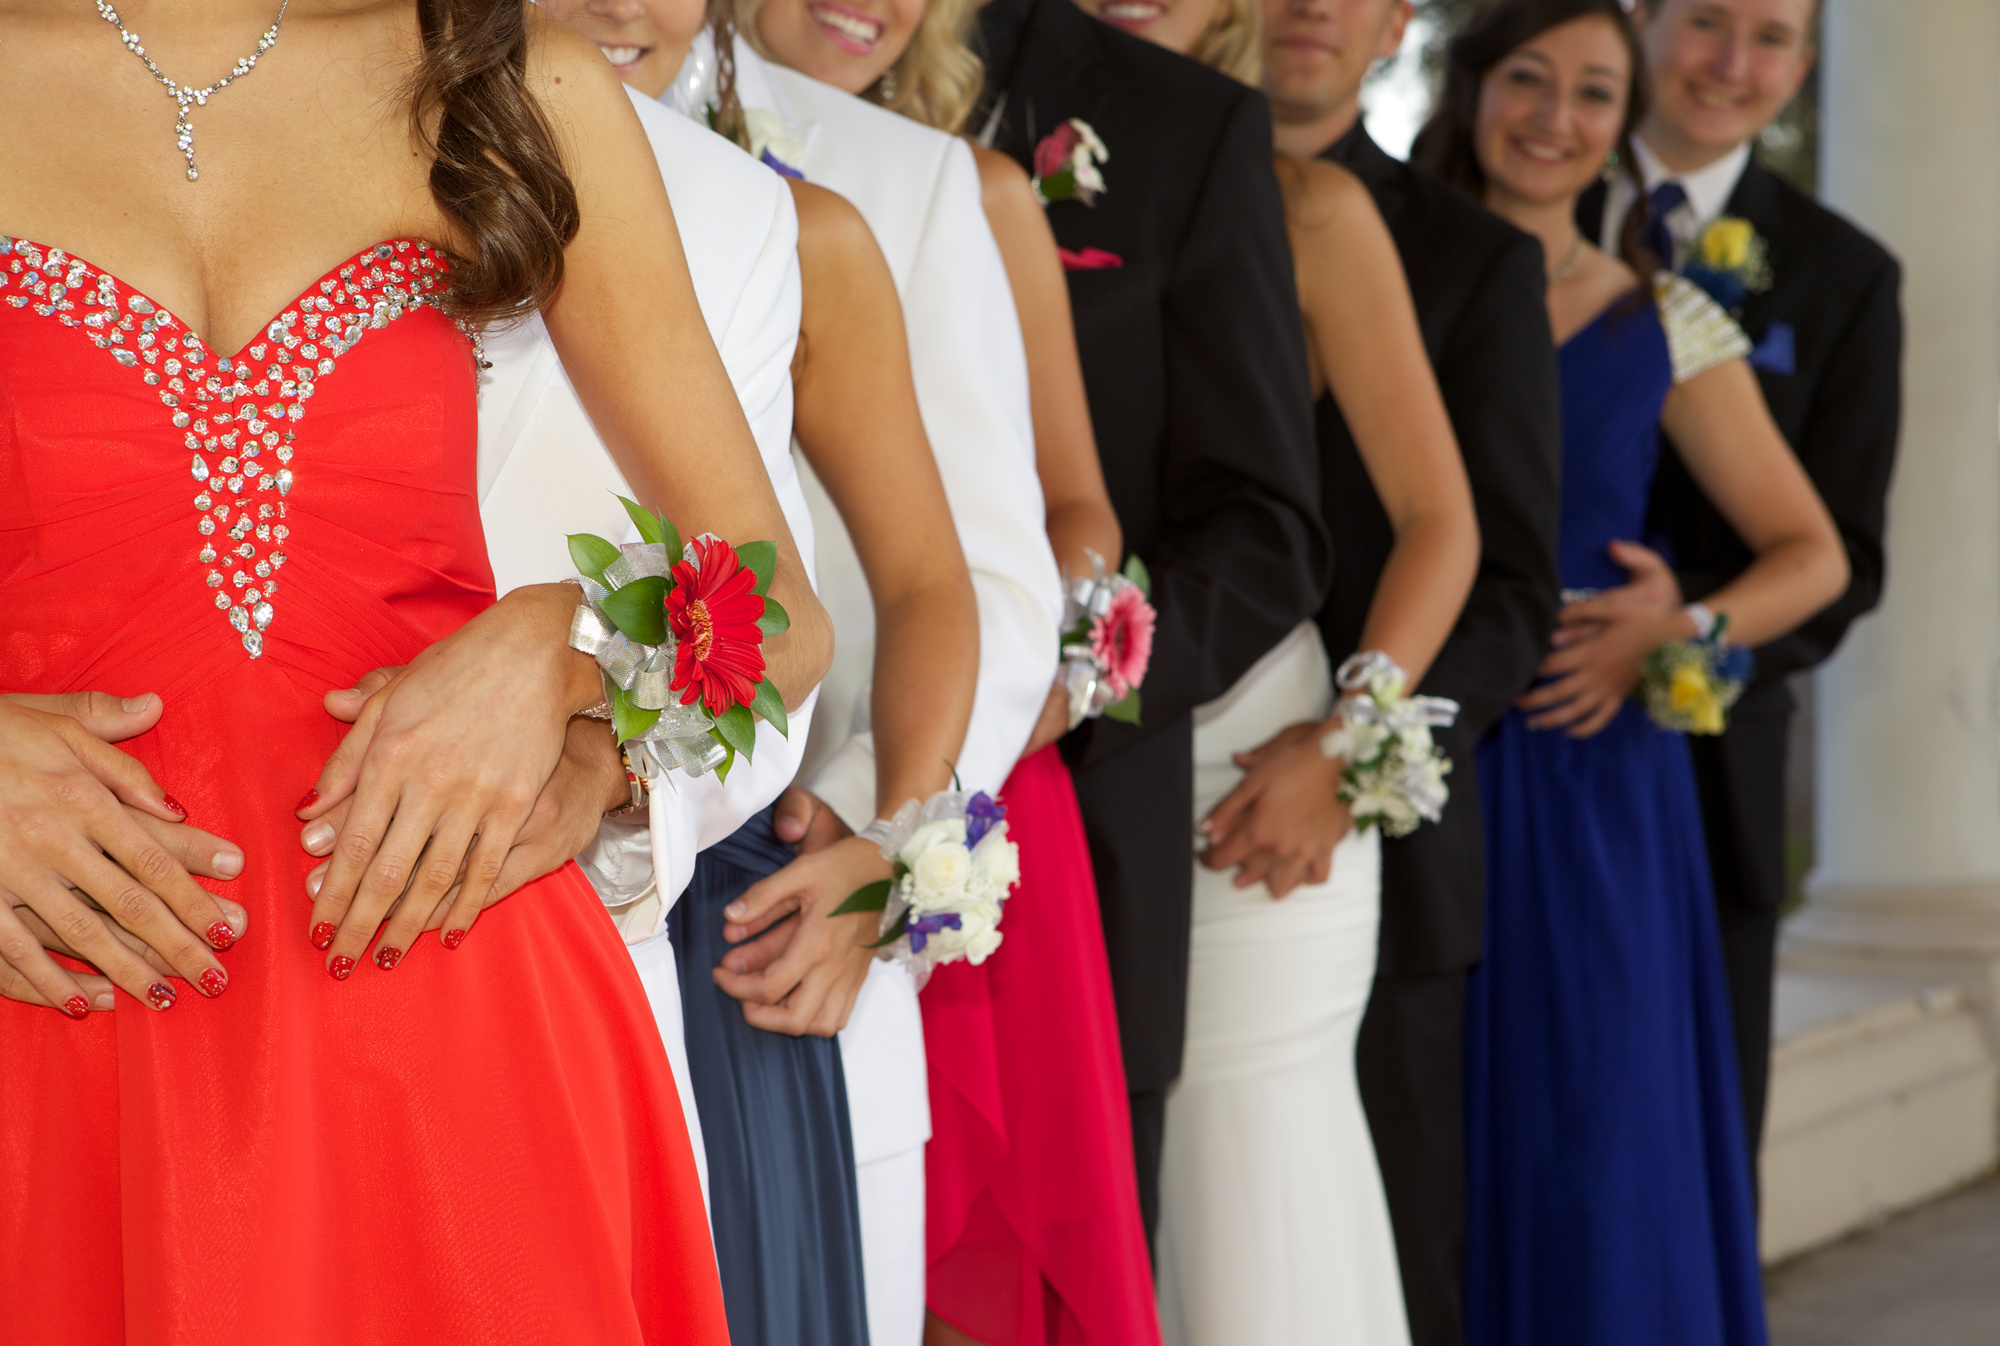 Prom Night 101 Checklist: How Parents Can Help with Planning